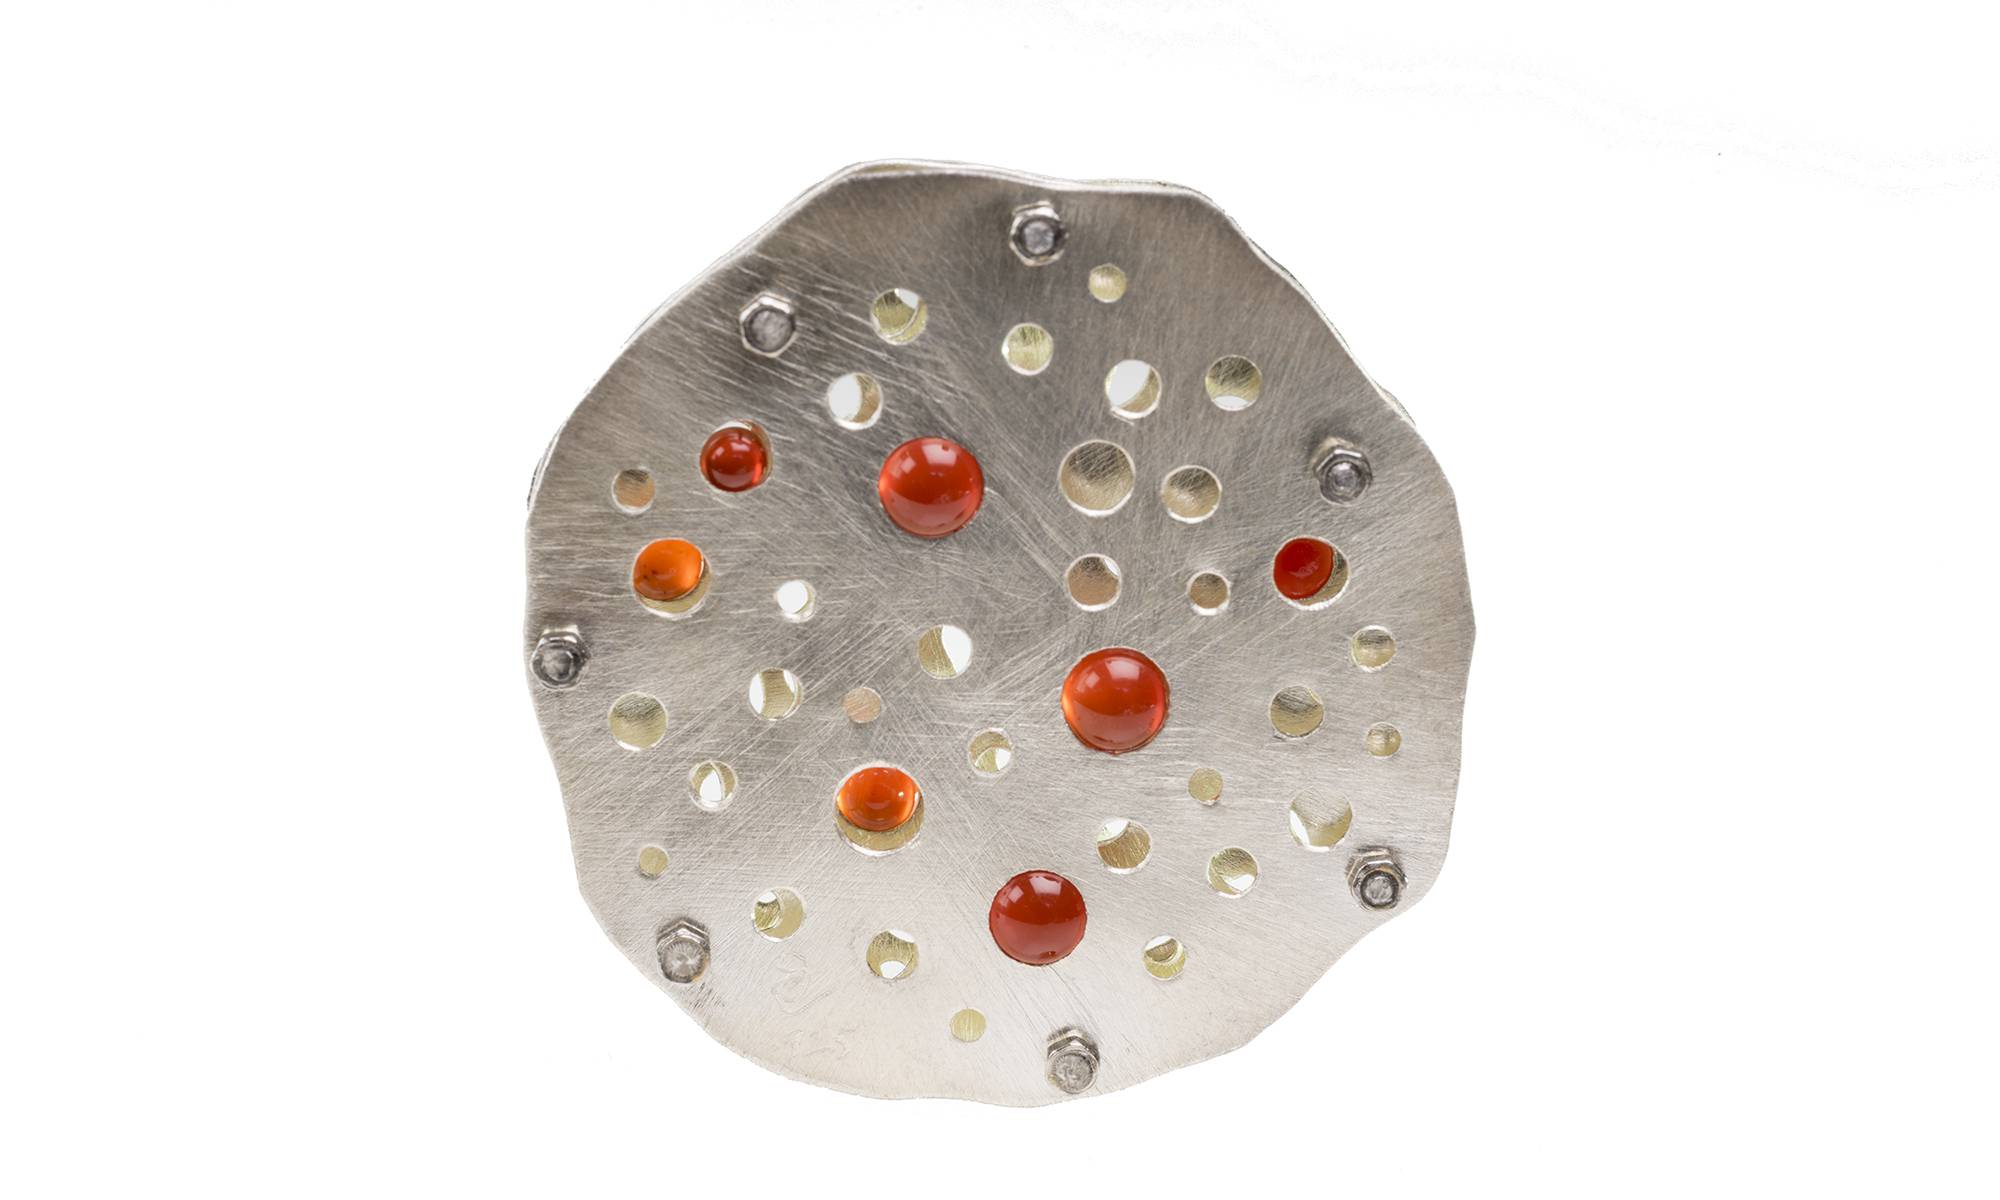 Three layer sterling silver and stainless steel radiolaria inspired pendant with tension set carnelian spheres